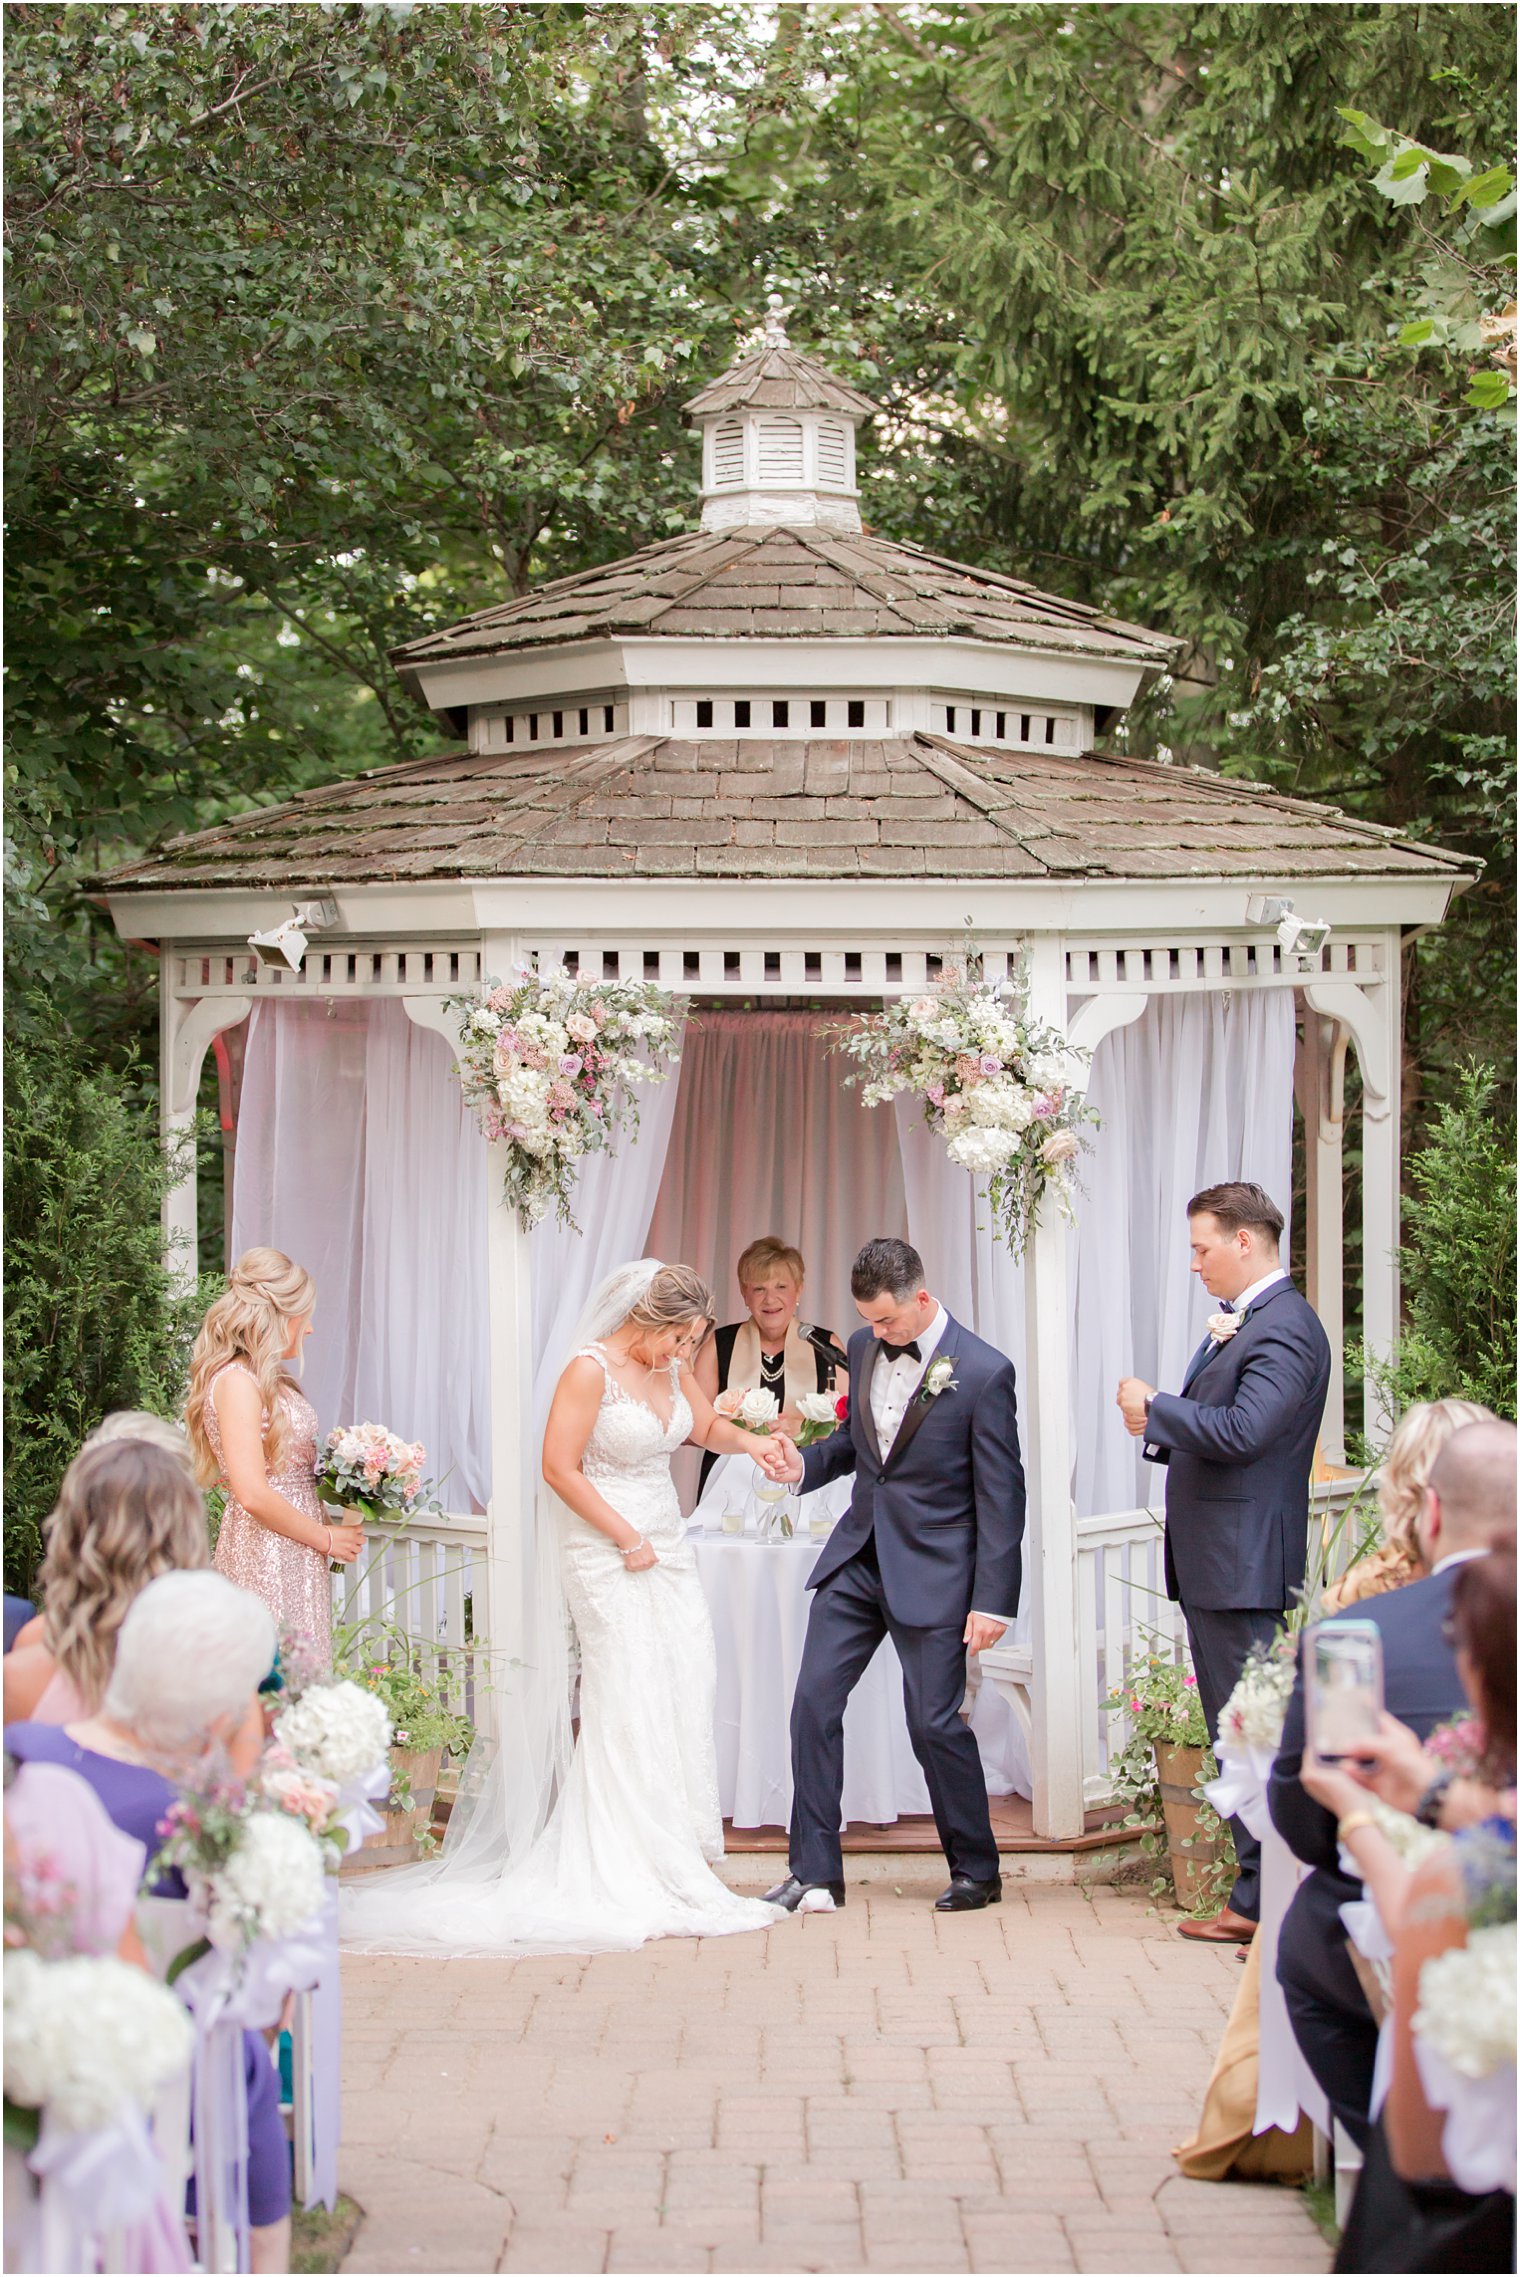 Outdoor ceremony at the Grain House at the Olde Mill Inn in Basking Ridge, NJ